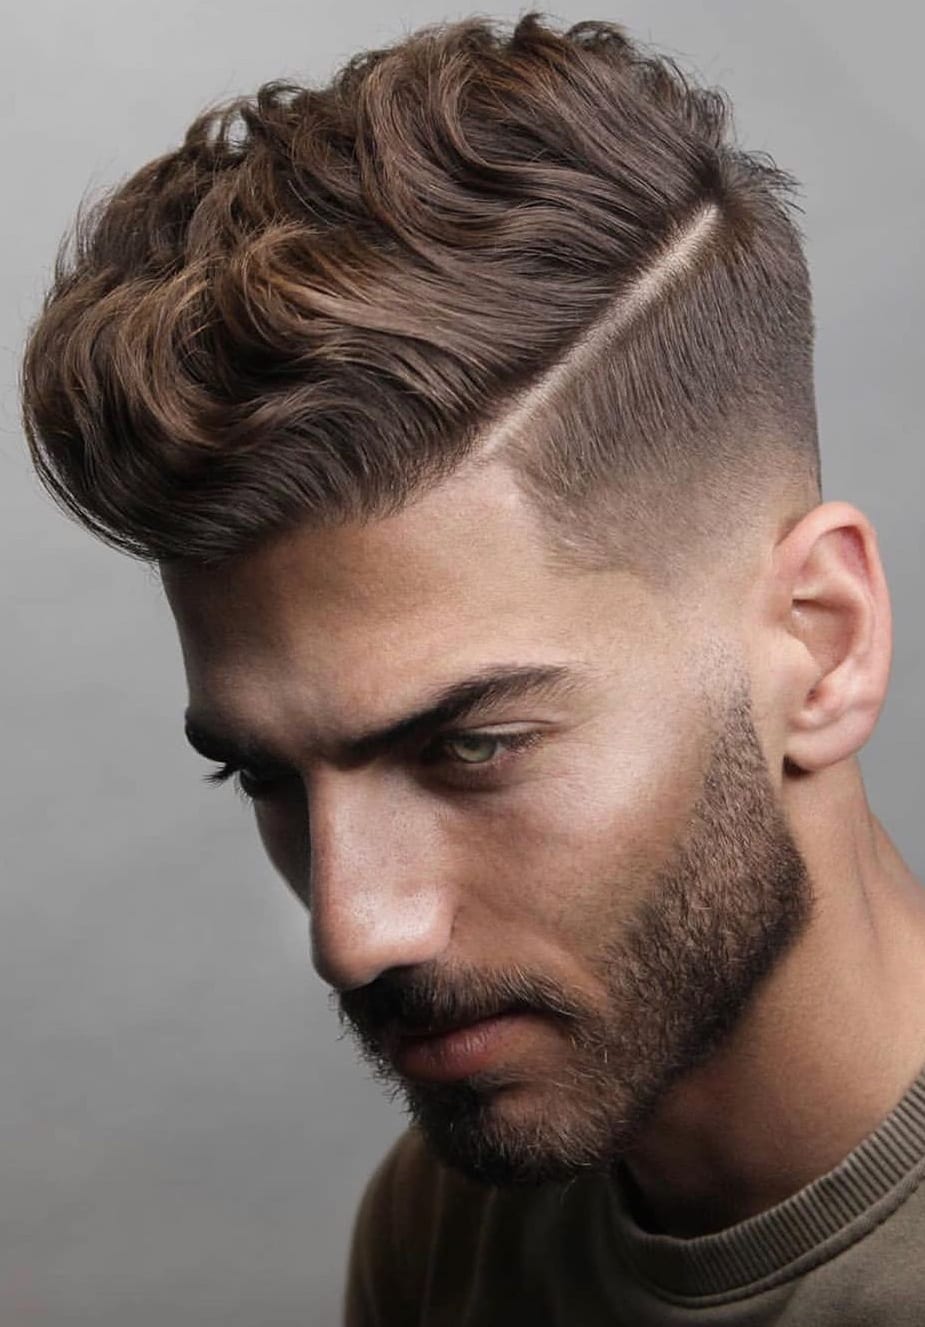 Amazing Haircuts for Men to try in 2020